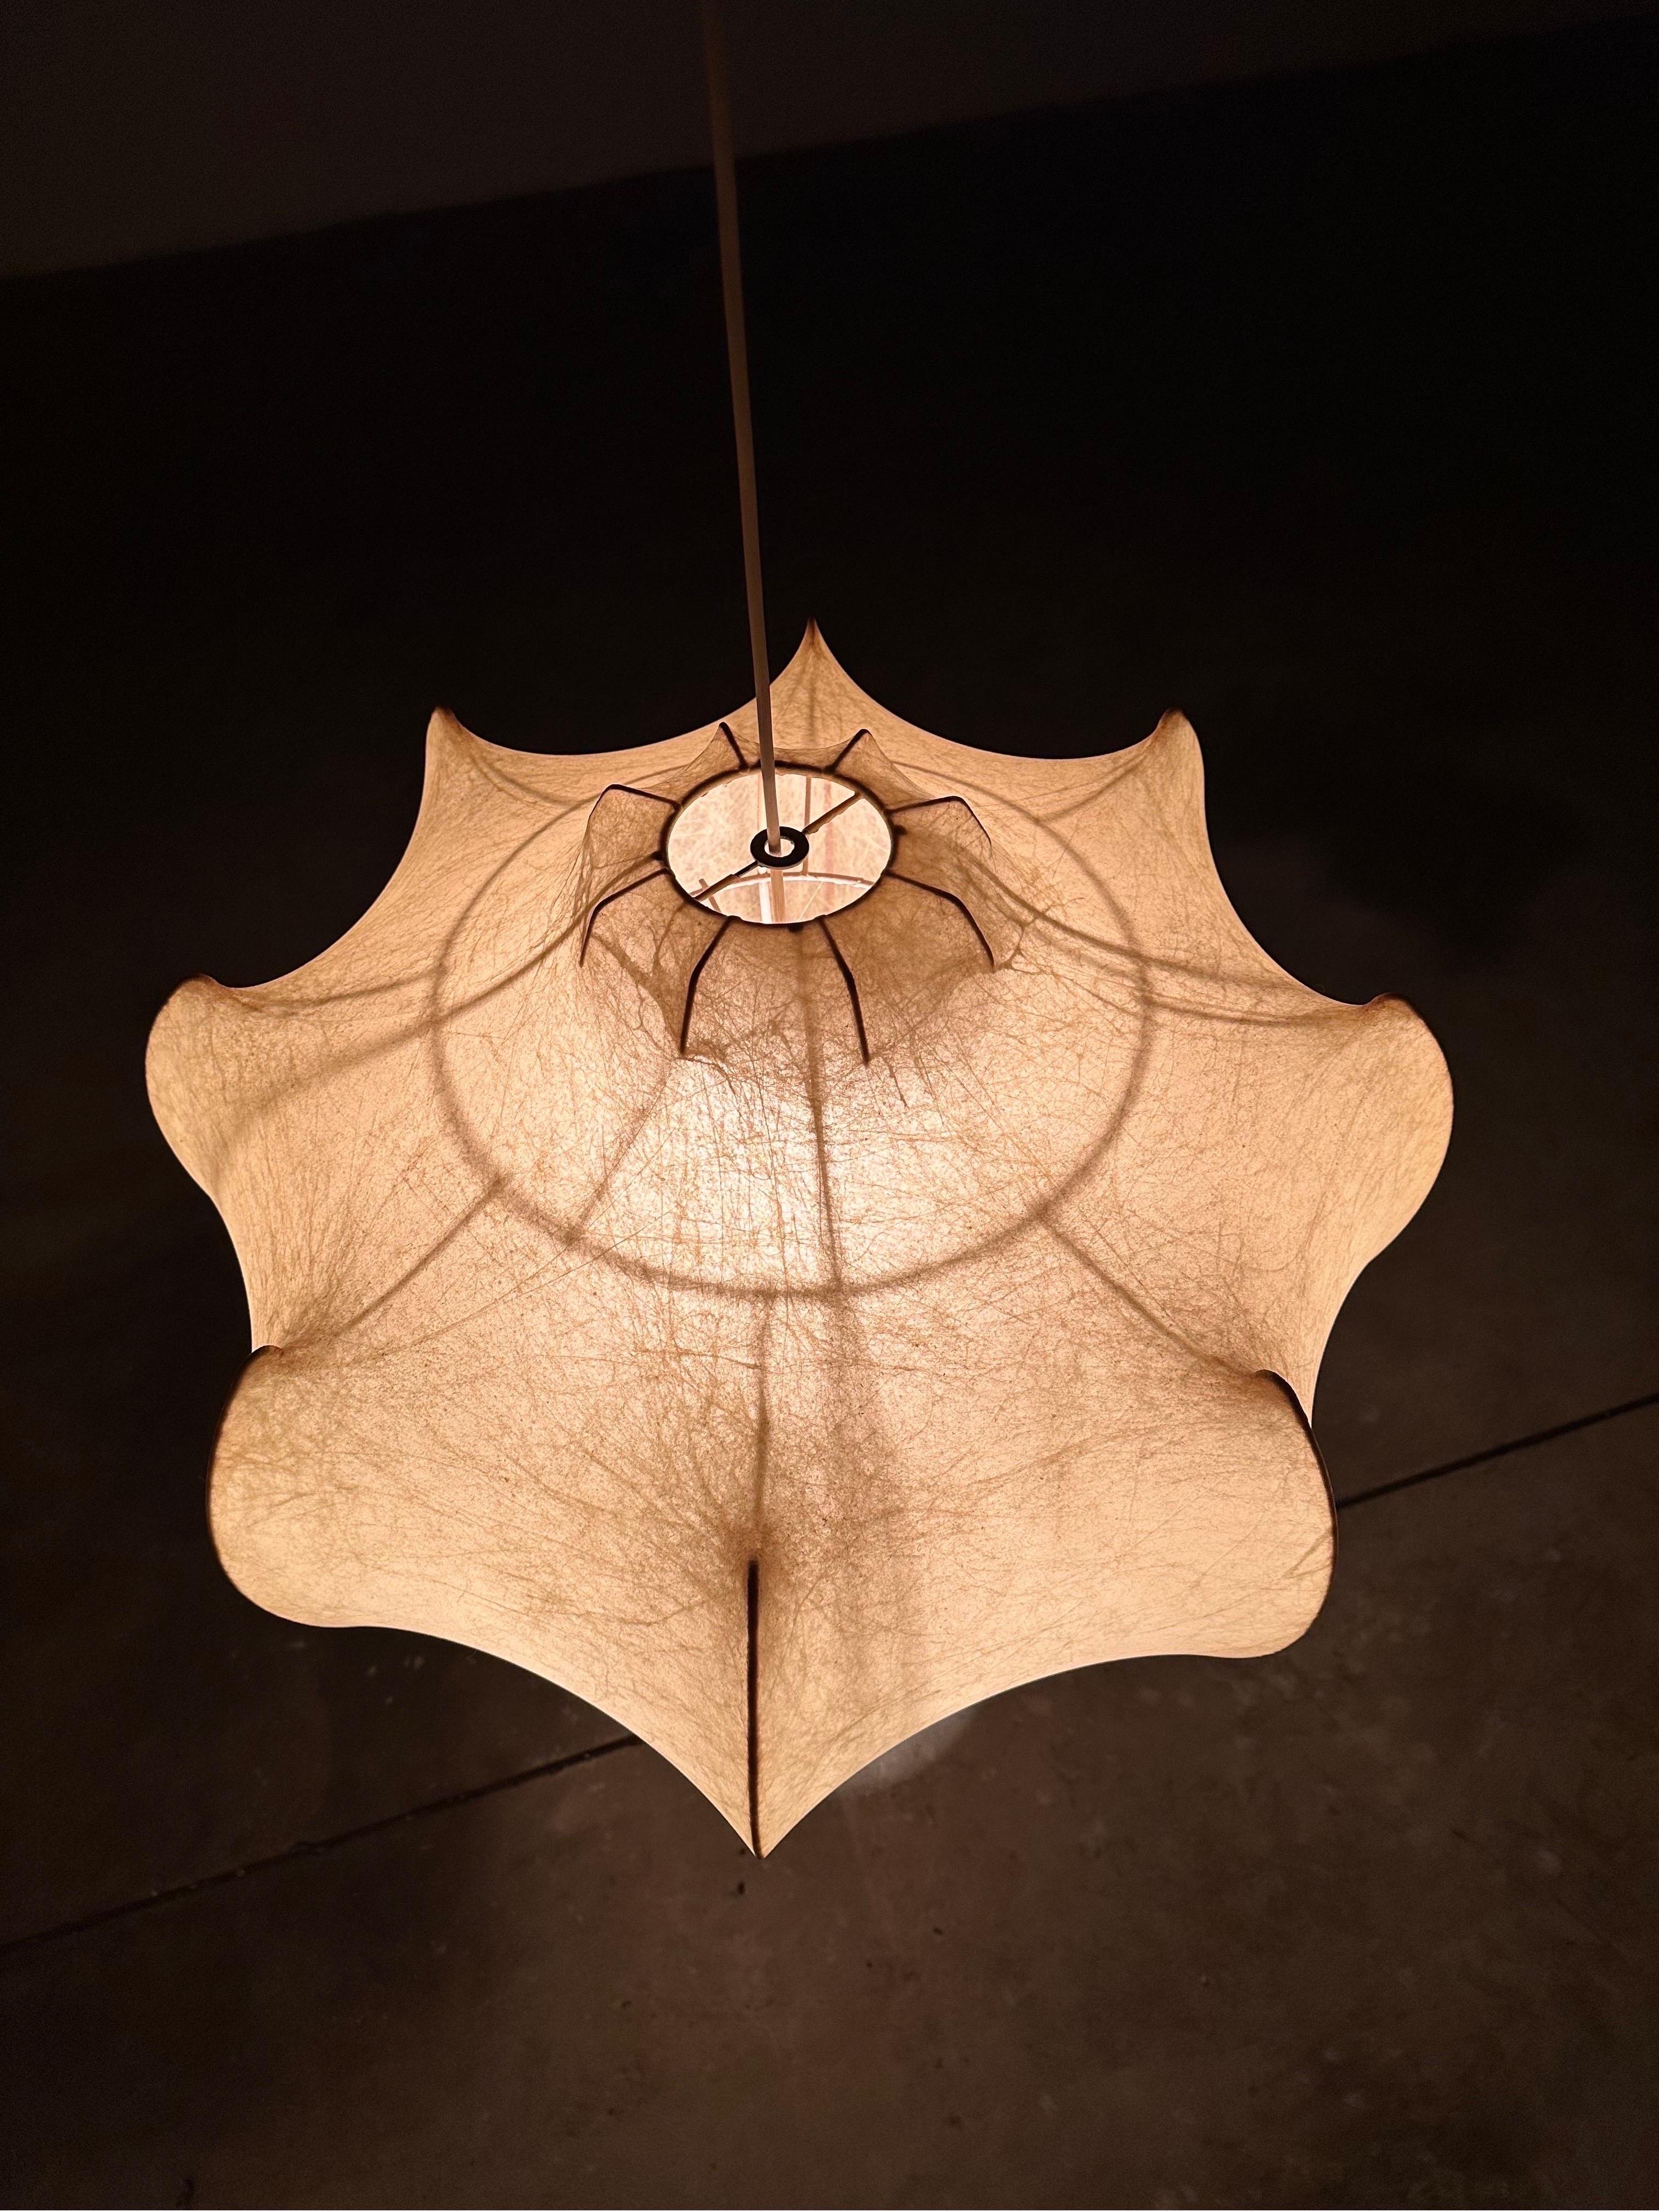 Metal 'Viscontea' Ceiling Lamp by Achille and Pier Giacomo Castiglioni for Flos, 1960s